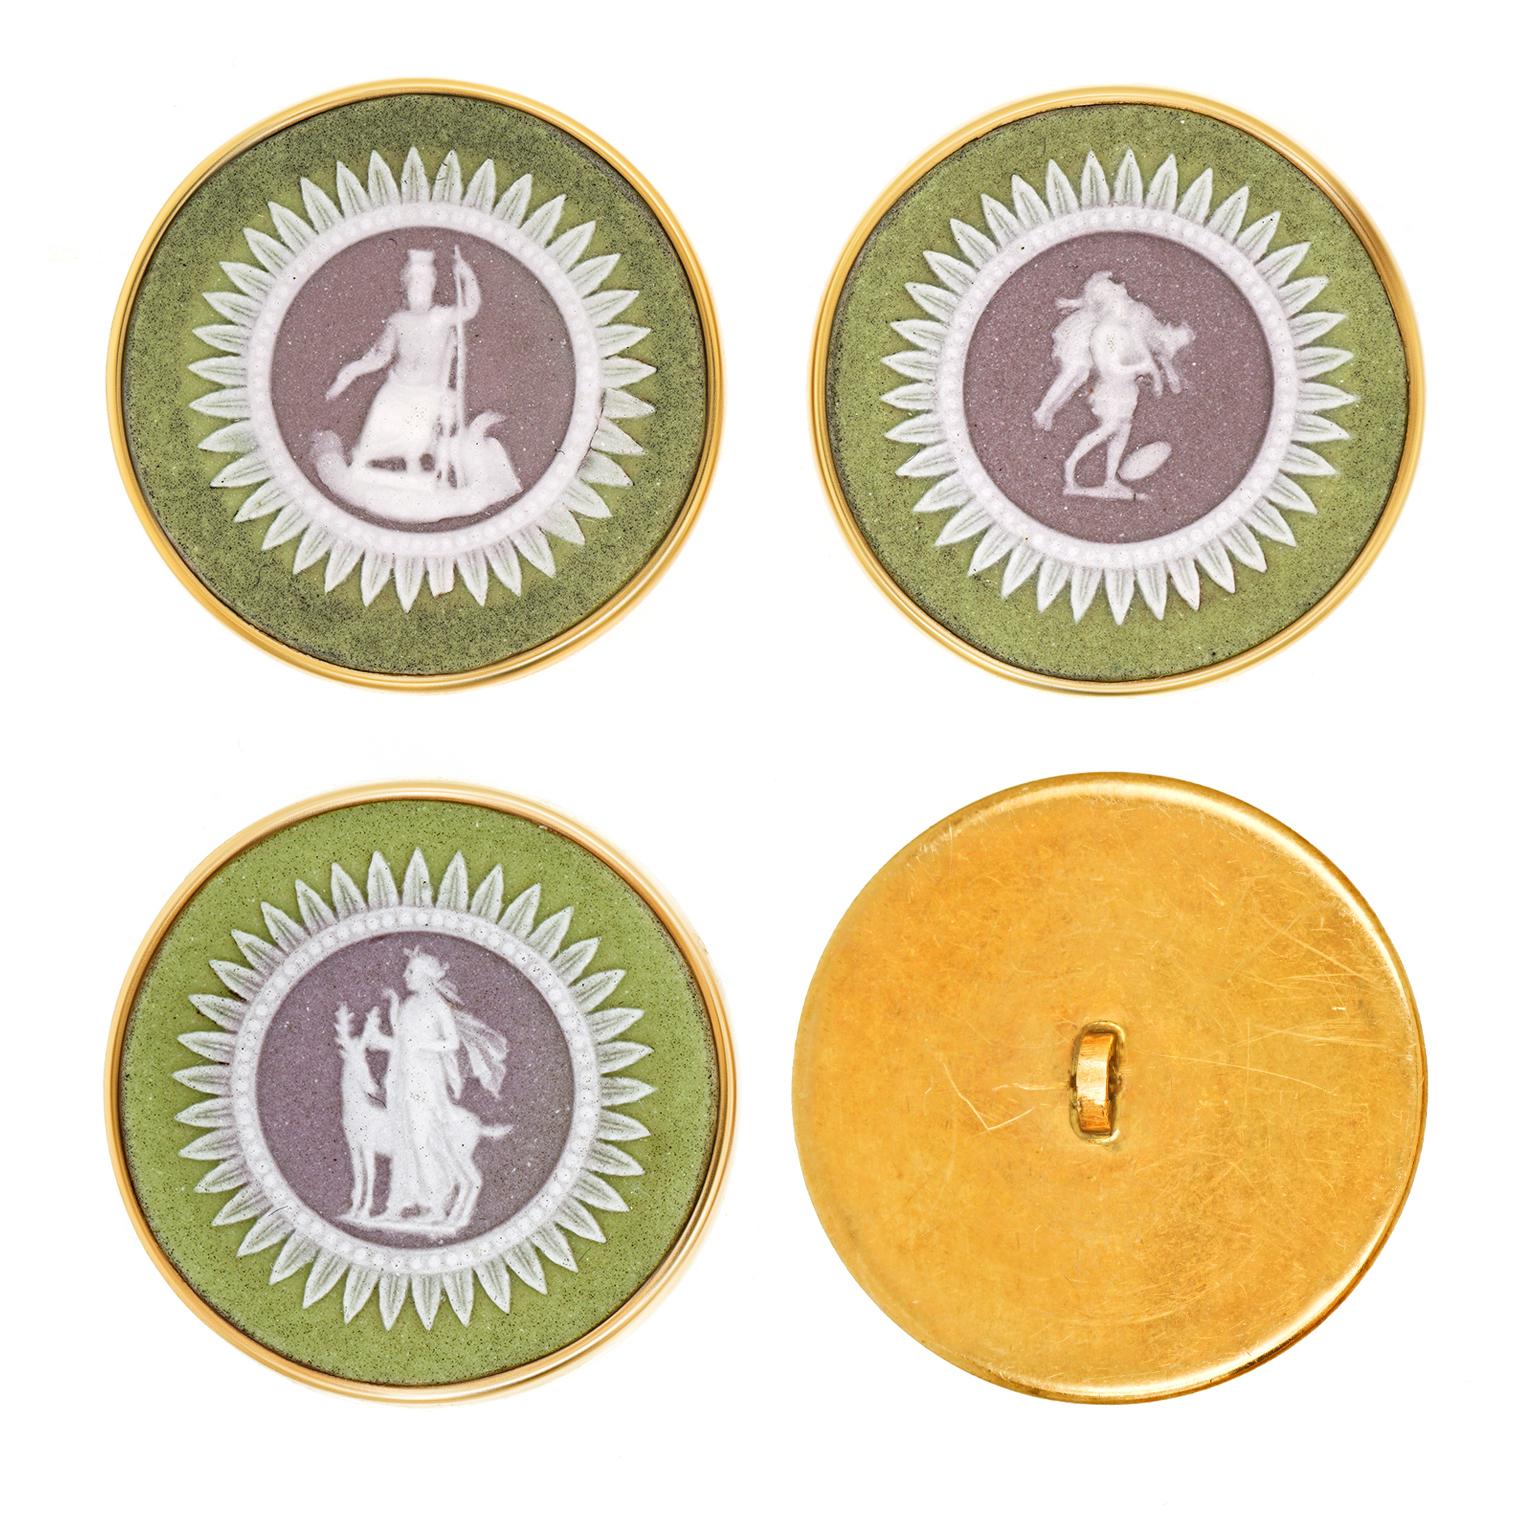 Circa 1860s, 14k, by Wedgewood, England.  These exceptionally-hued 19th-century Parian buttons by Wedgwood are beautifully mounted in heavy 14k gold (most likely in the 1950s). Very good condition.  Tiny loss on one petal noted, hard to